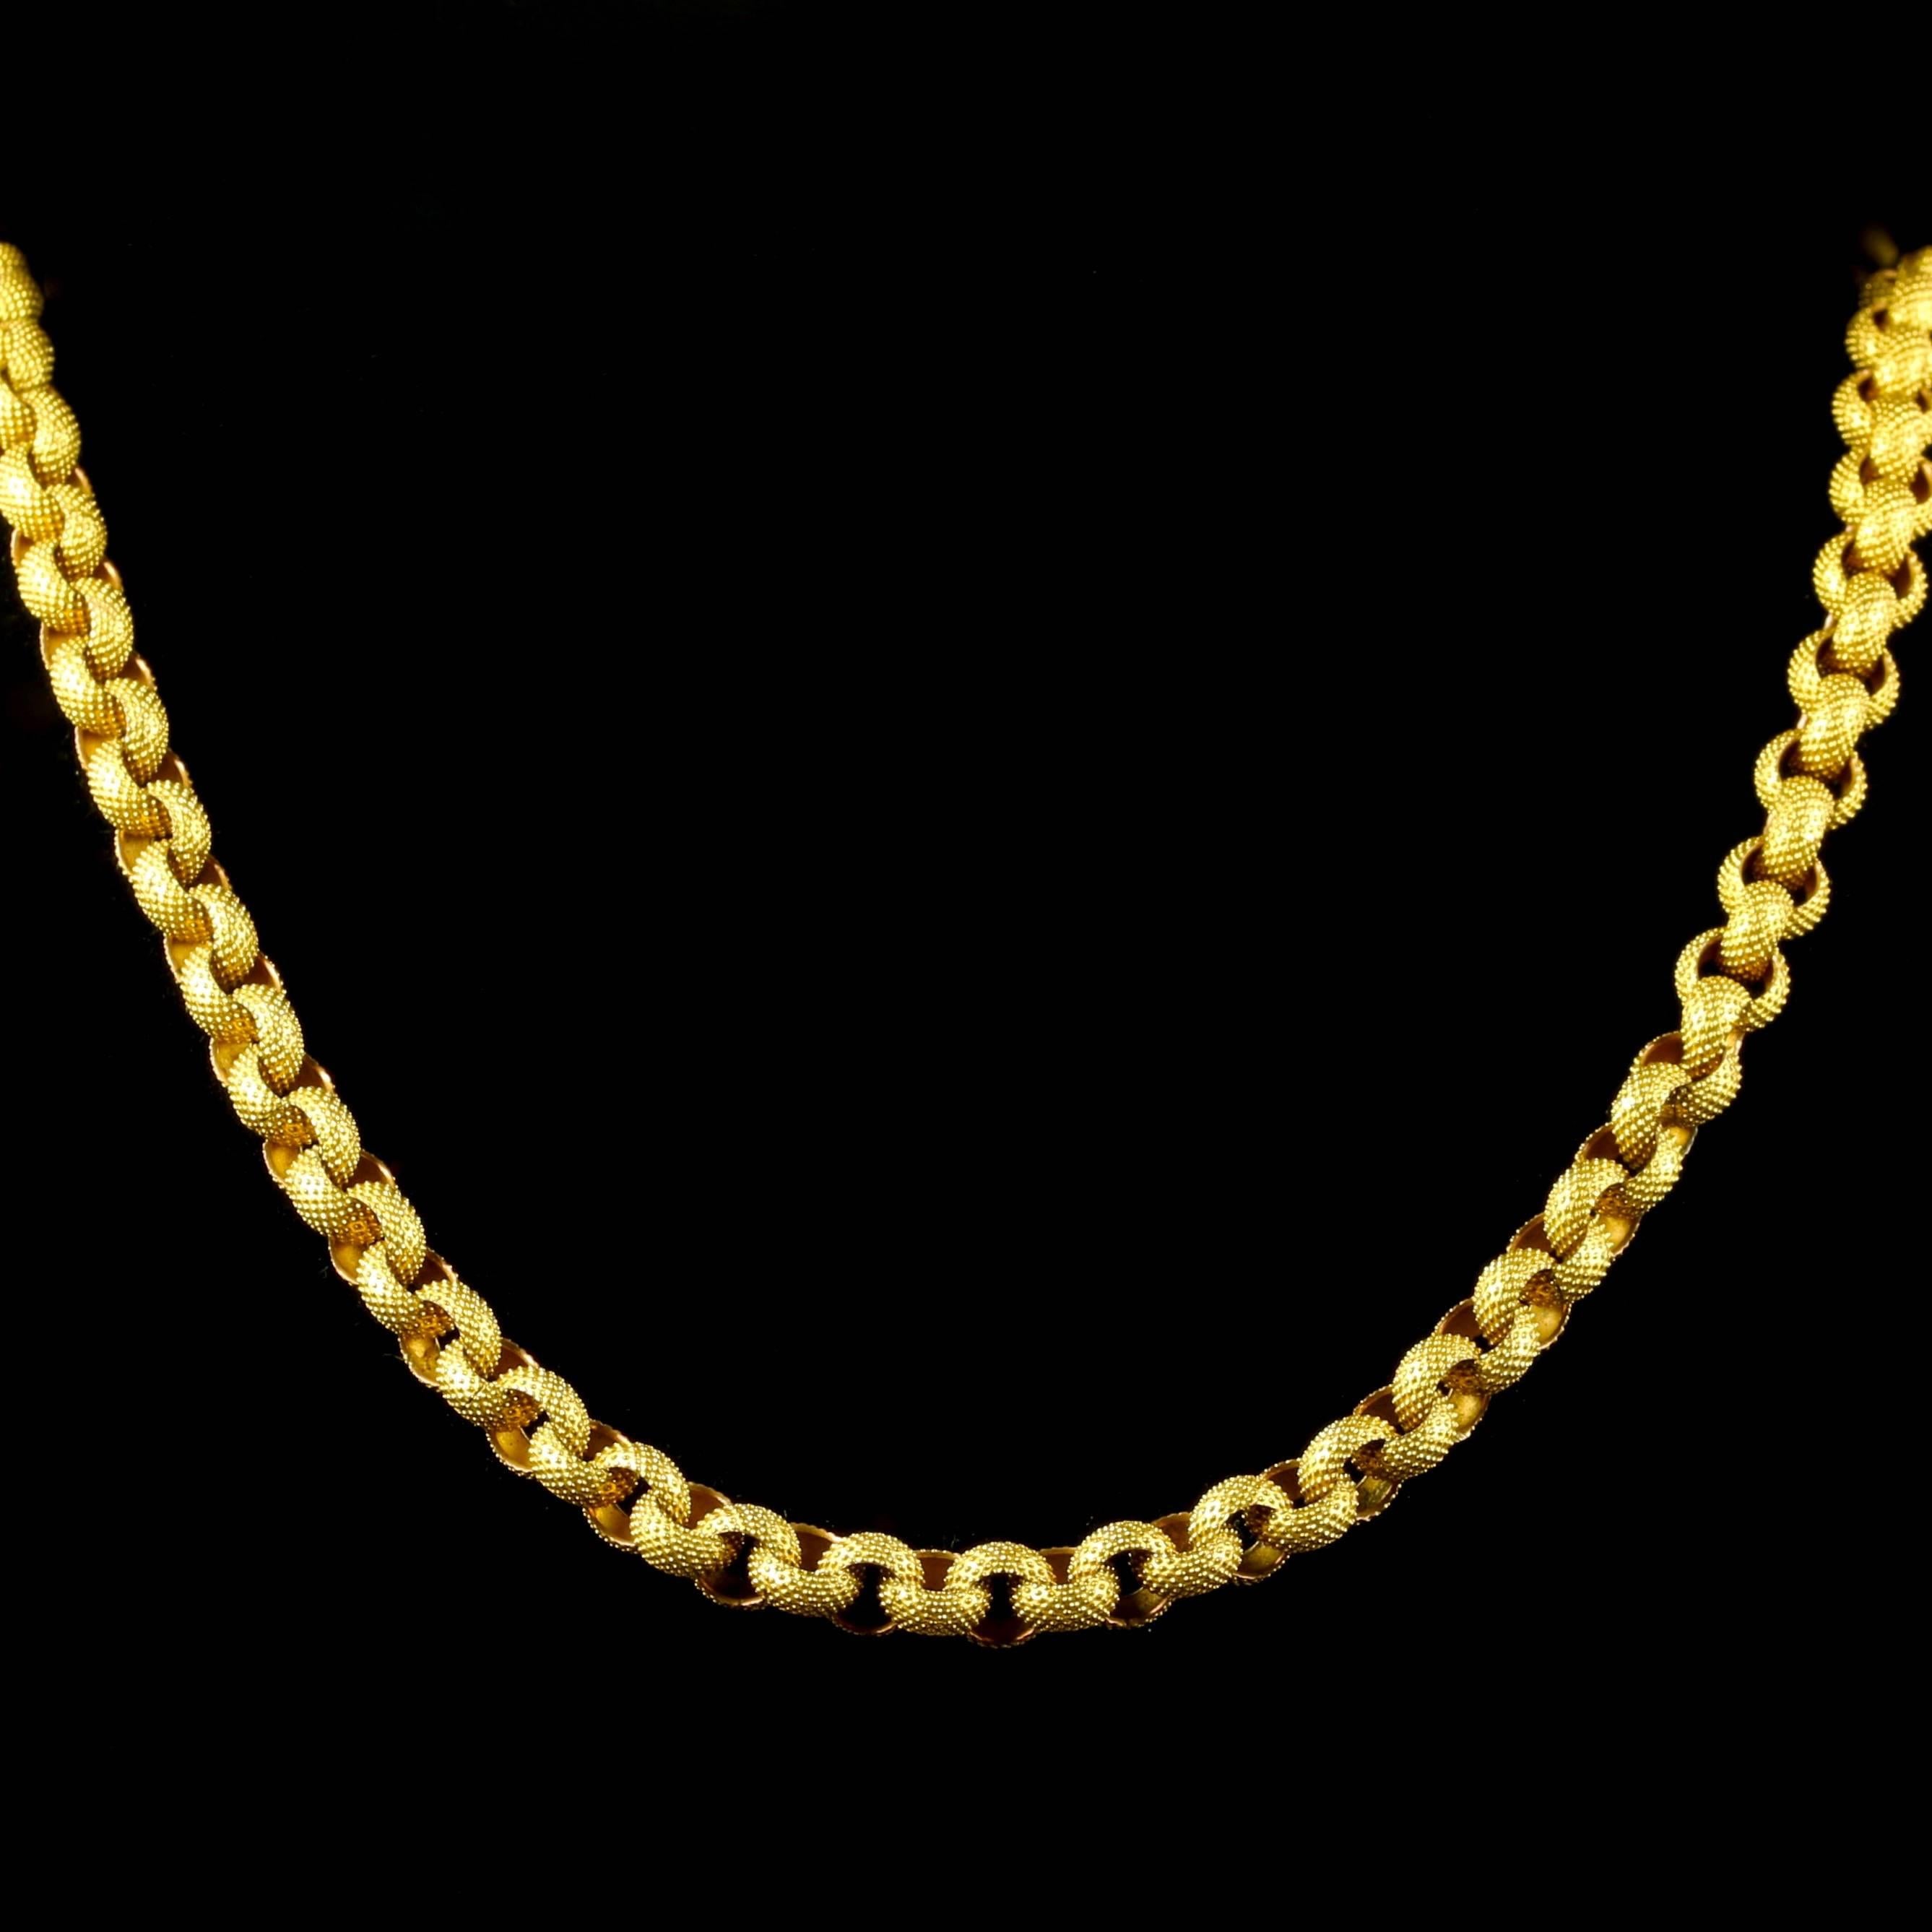 This fabulous long Georgian chain is 18th Century - Circa 1780.

Absolutely breath-taking in workmanship, each link is hand made leading to an original barrel clasp.

Steeped in English History, purchased in London.

The necklace is 18ct gold on